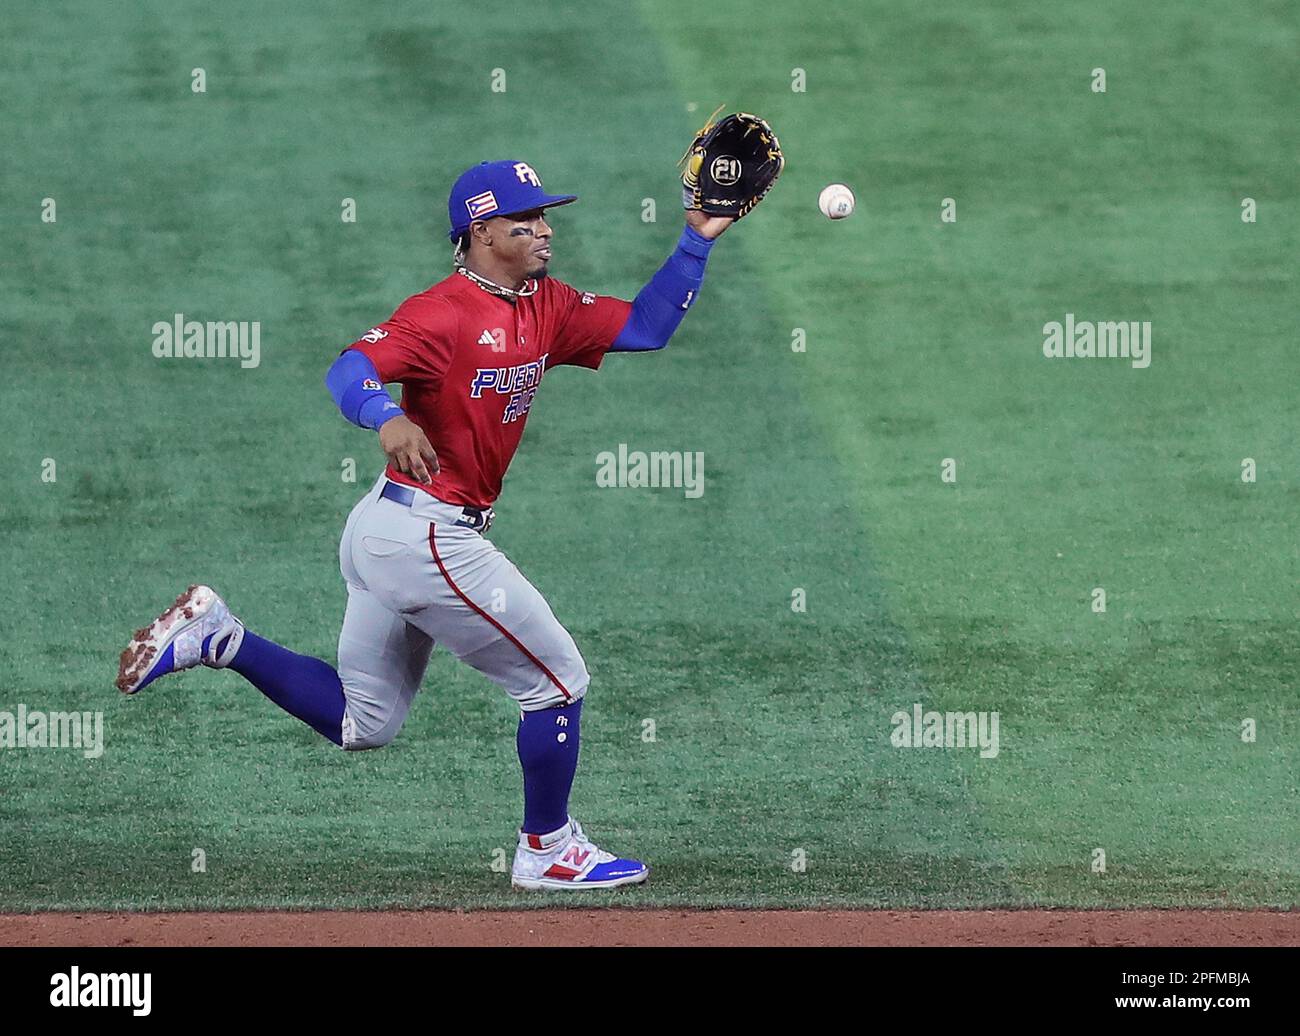 Miami, United States. 17th Mar, 2023. Puerto Rico's Francisco Lindor (12) makes a play on a ball in the second inning during the 2023 World Baseball Classic quarter-final game against Mexico in Miami, Florida on Friday, March 17, 2023. Photo by Aaron Josefczyk/UPI Credit: UPI/Alamy Live News Stock Photo